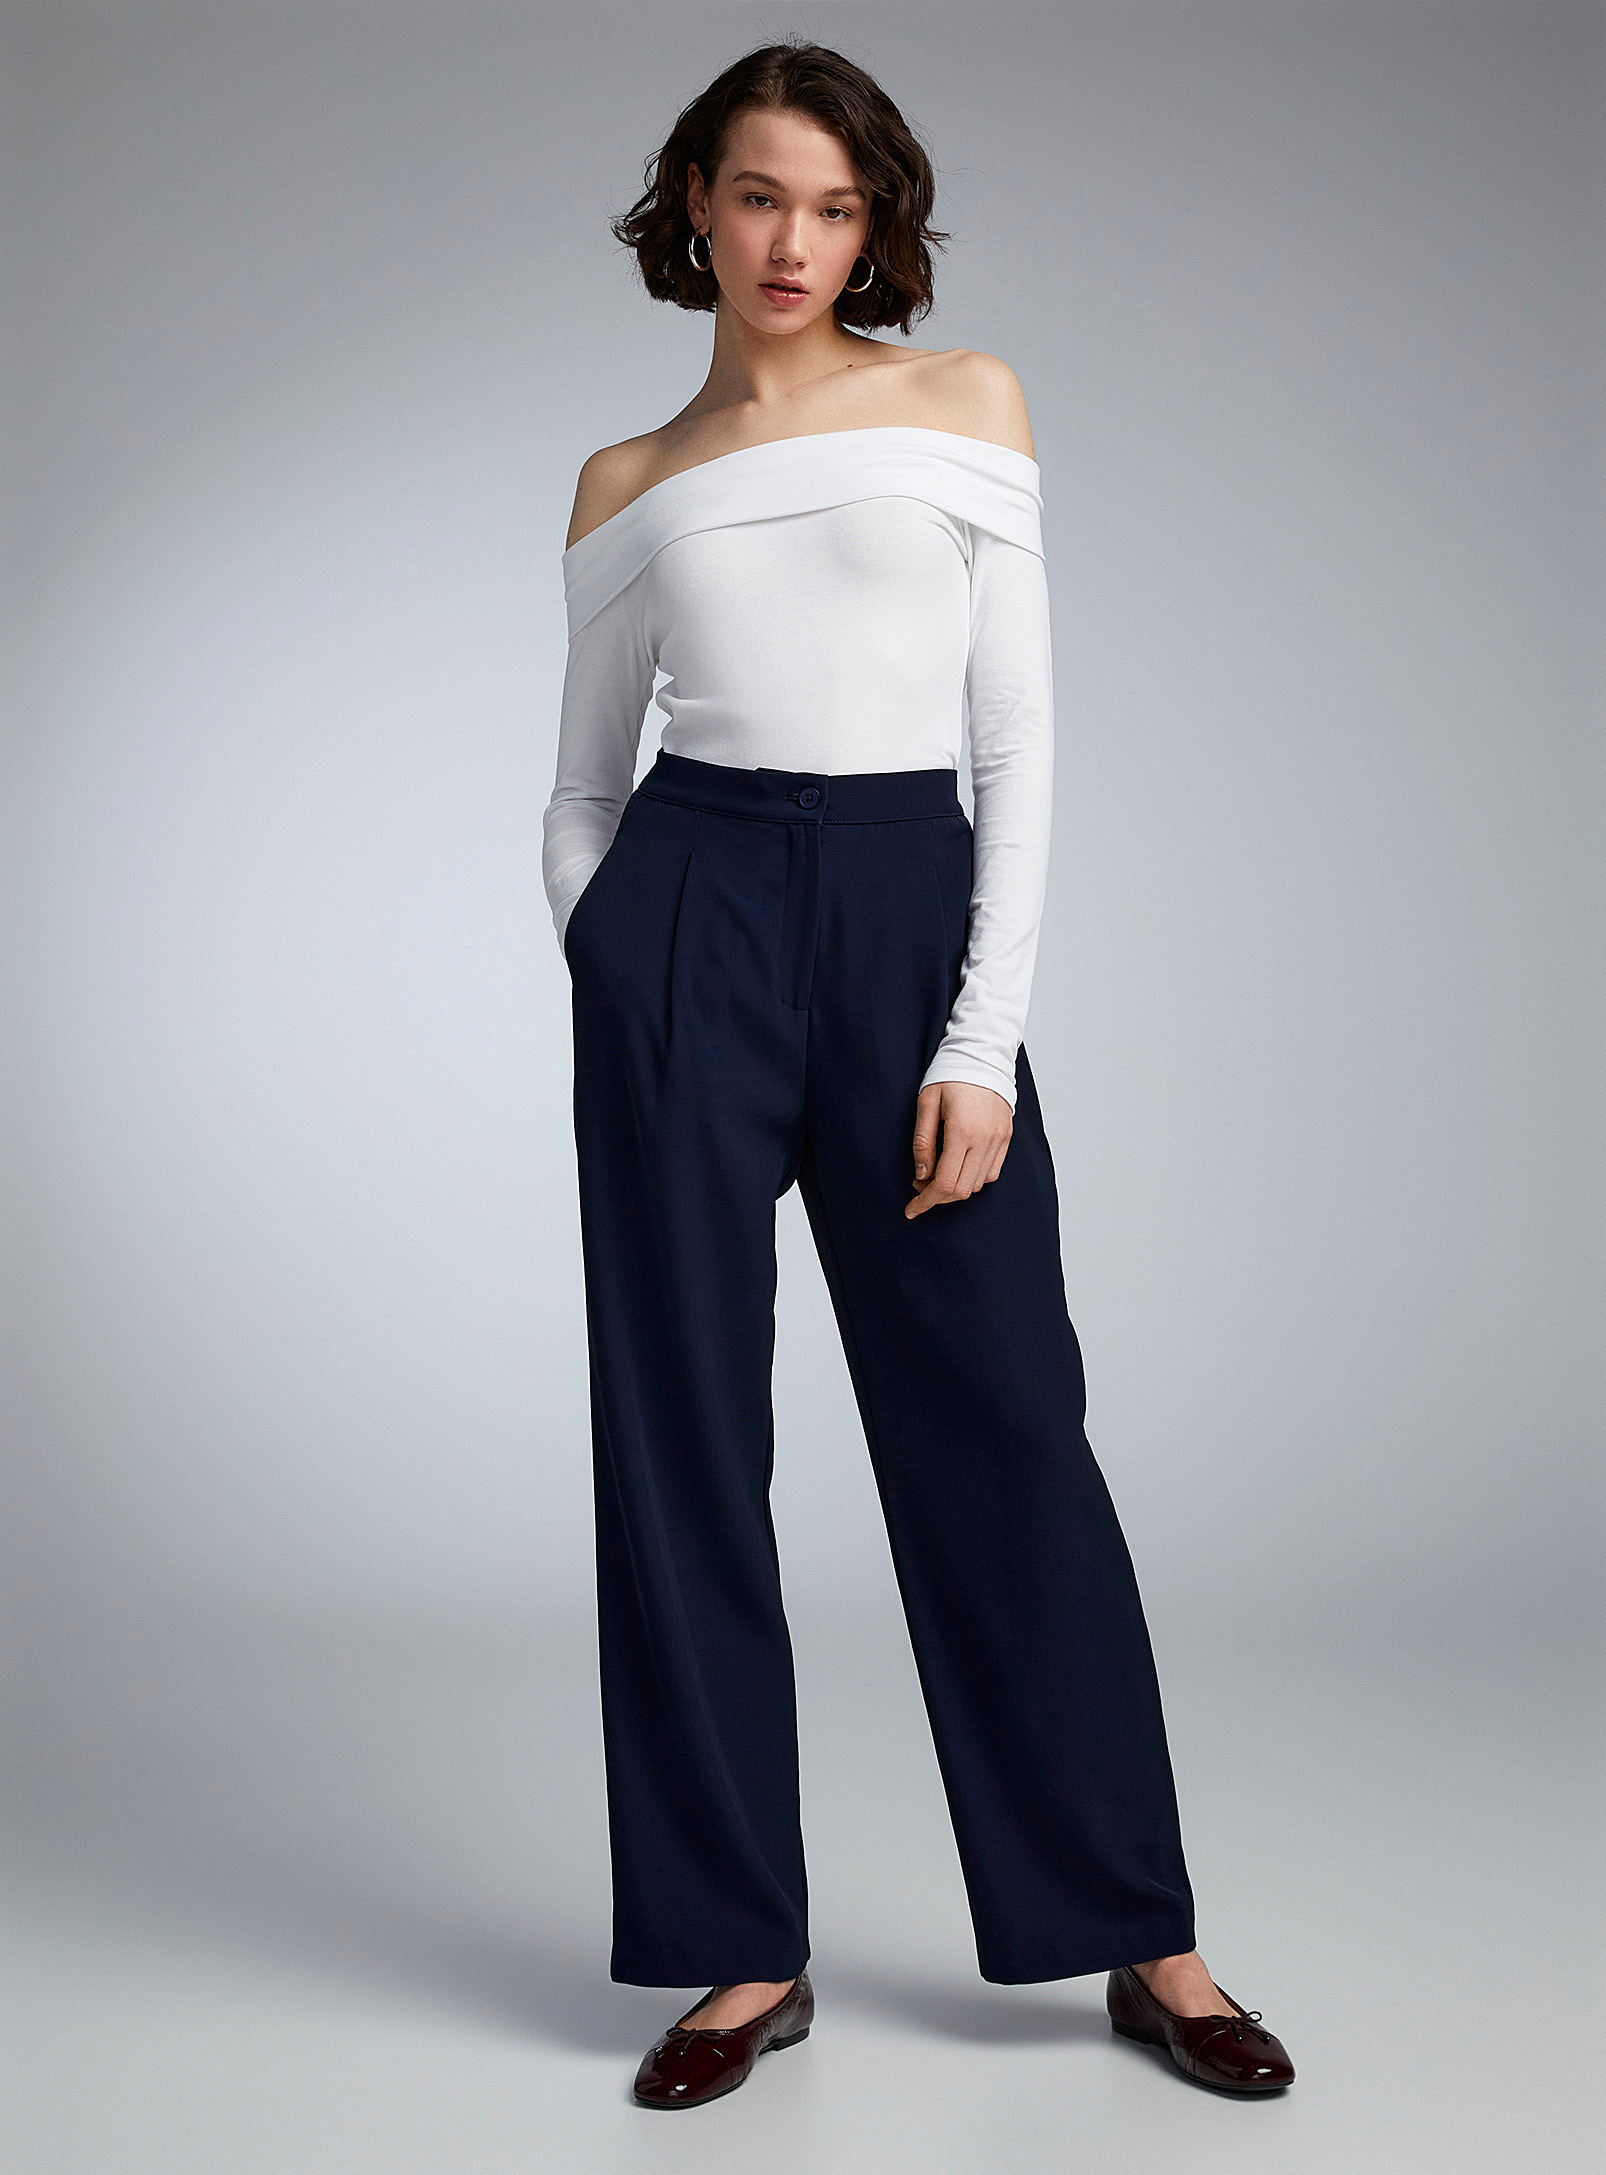 Twik Pleated Thick Crepe Dress Pant In Navy/midnight Blue